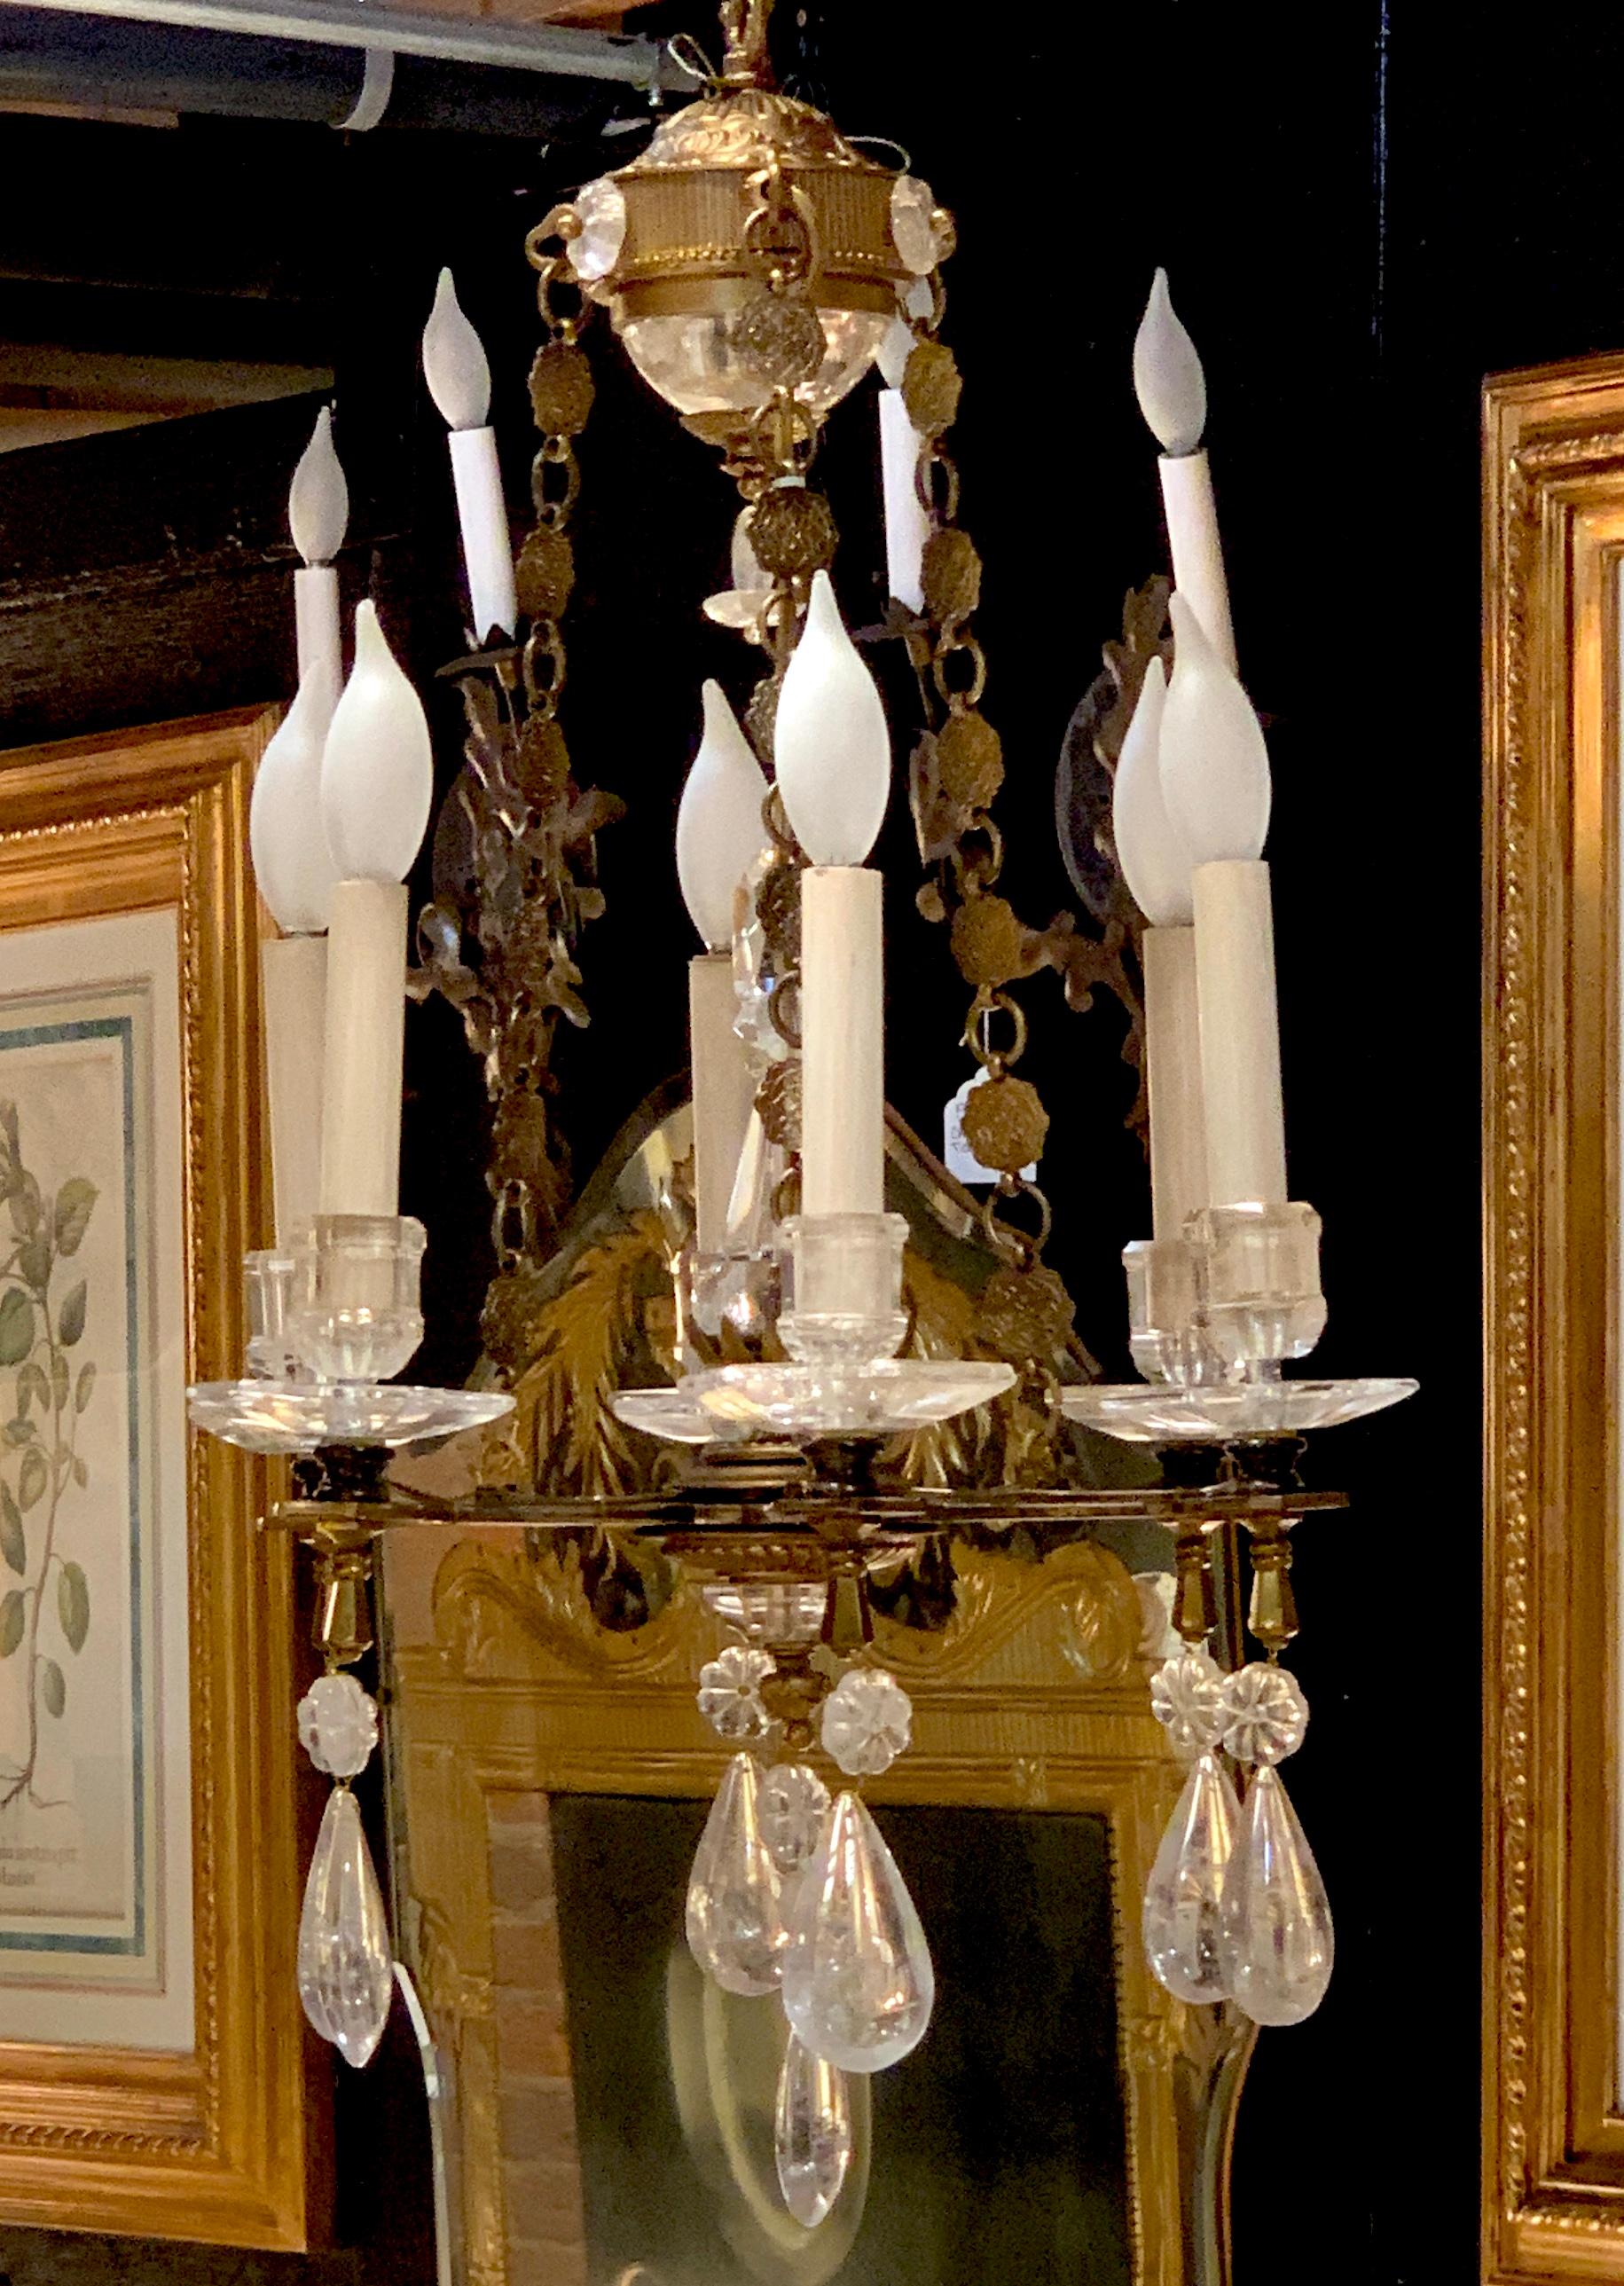 Exquisite all rock crystal and gilt bronze six-light boudoir chandelier, of diminutive and yet having a substantial presence this six light all carved rock crystal including the candlecups and bobeches, and the center spheres. This chandelier